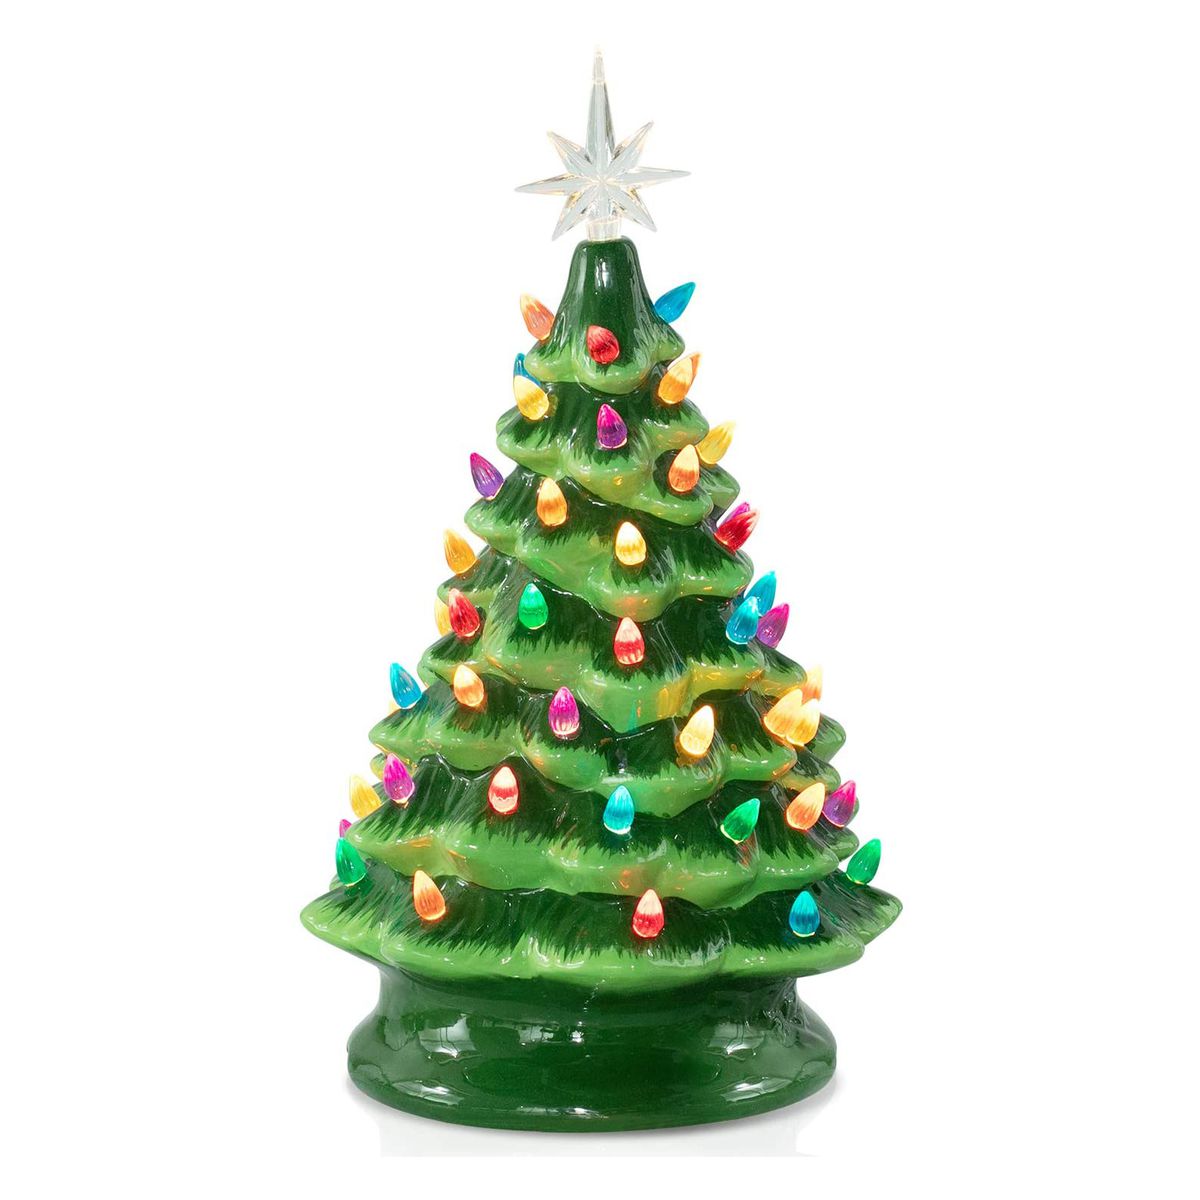 MCEAST 24 Inch Mini Tabletop Christmas Tree with Lights Xmas Tree Set Includes 2